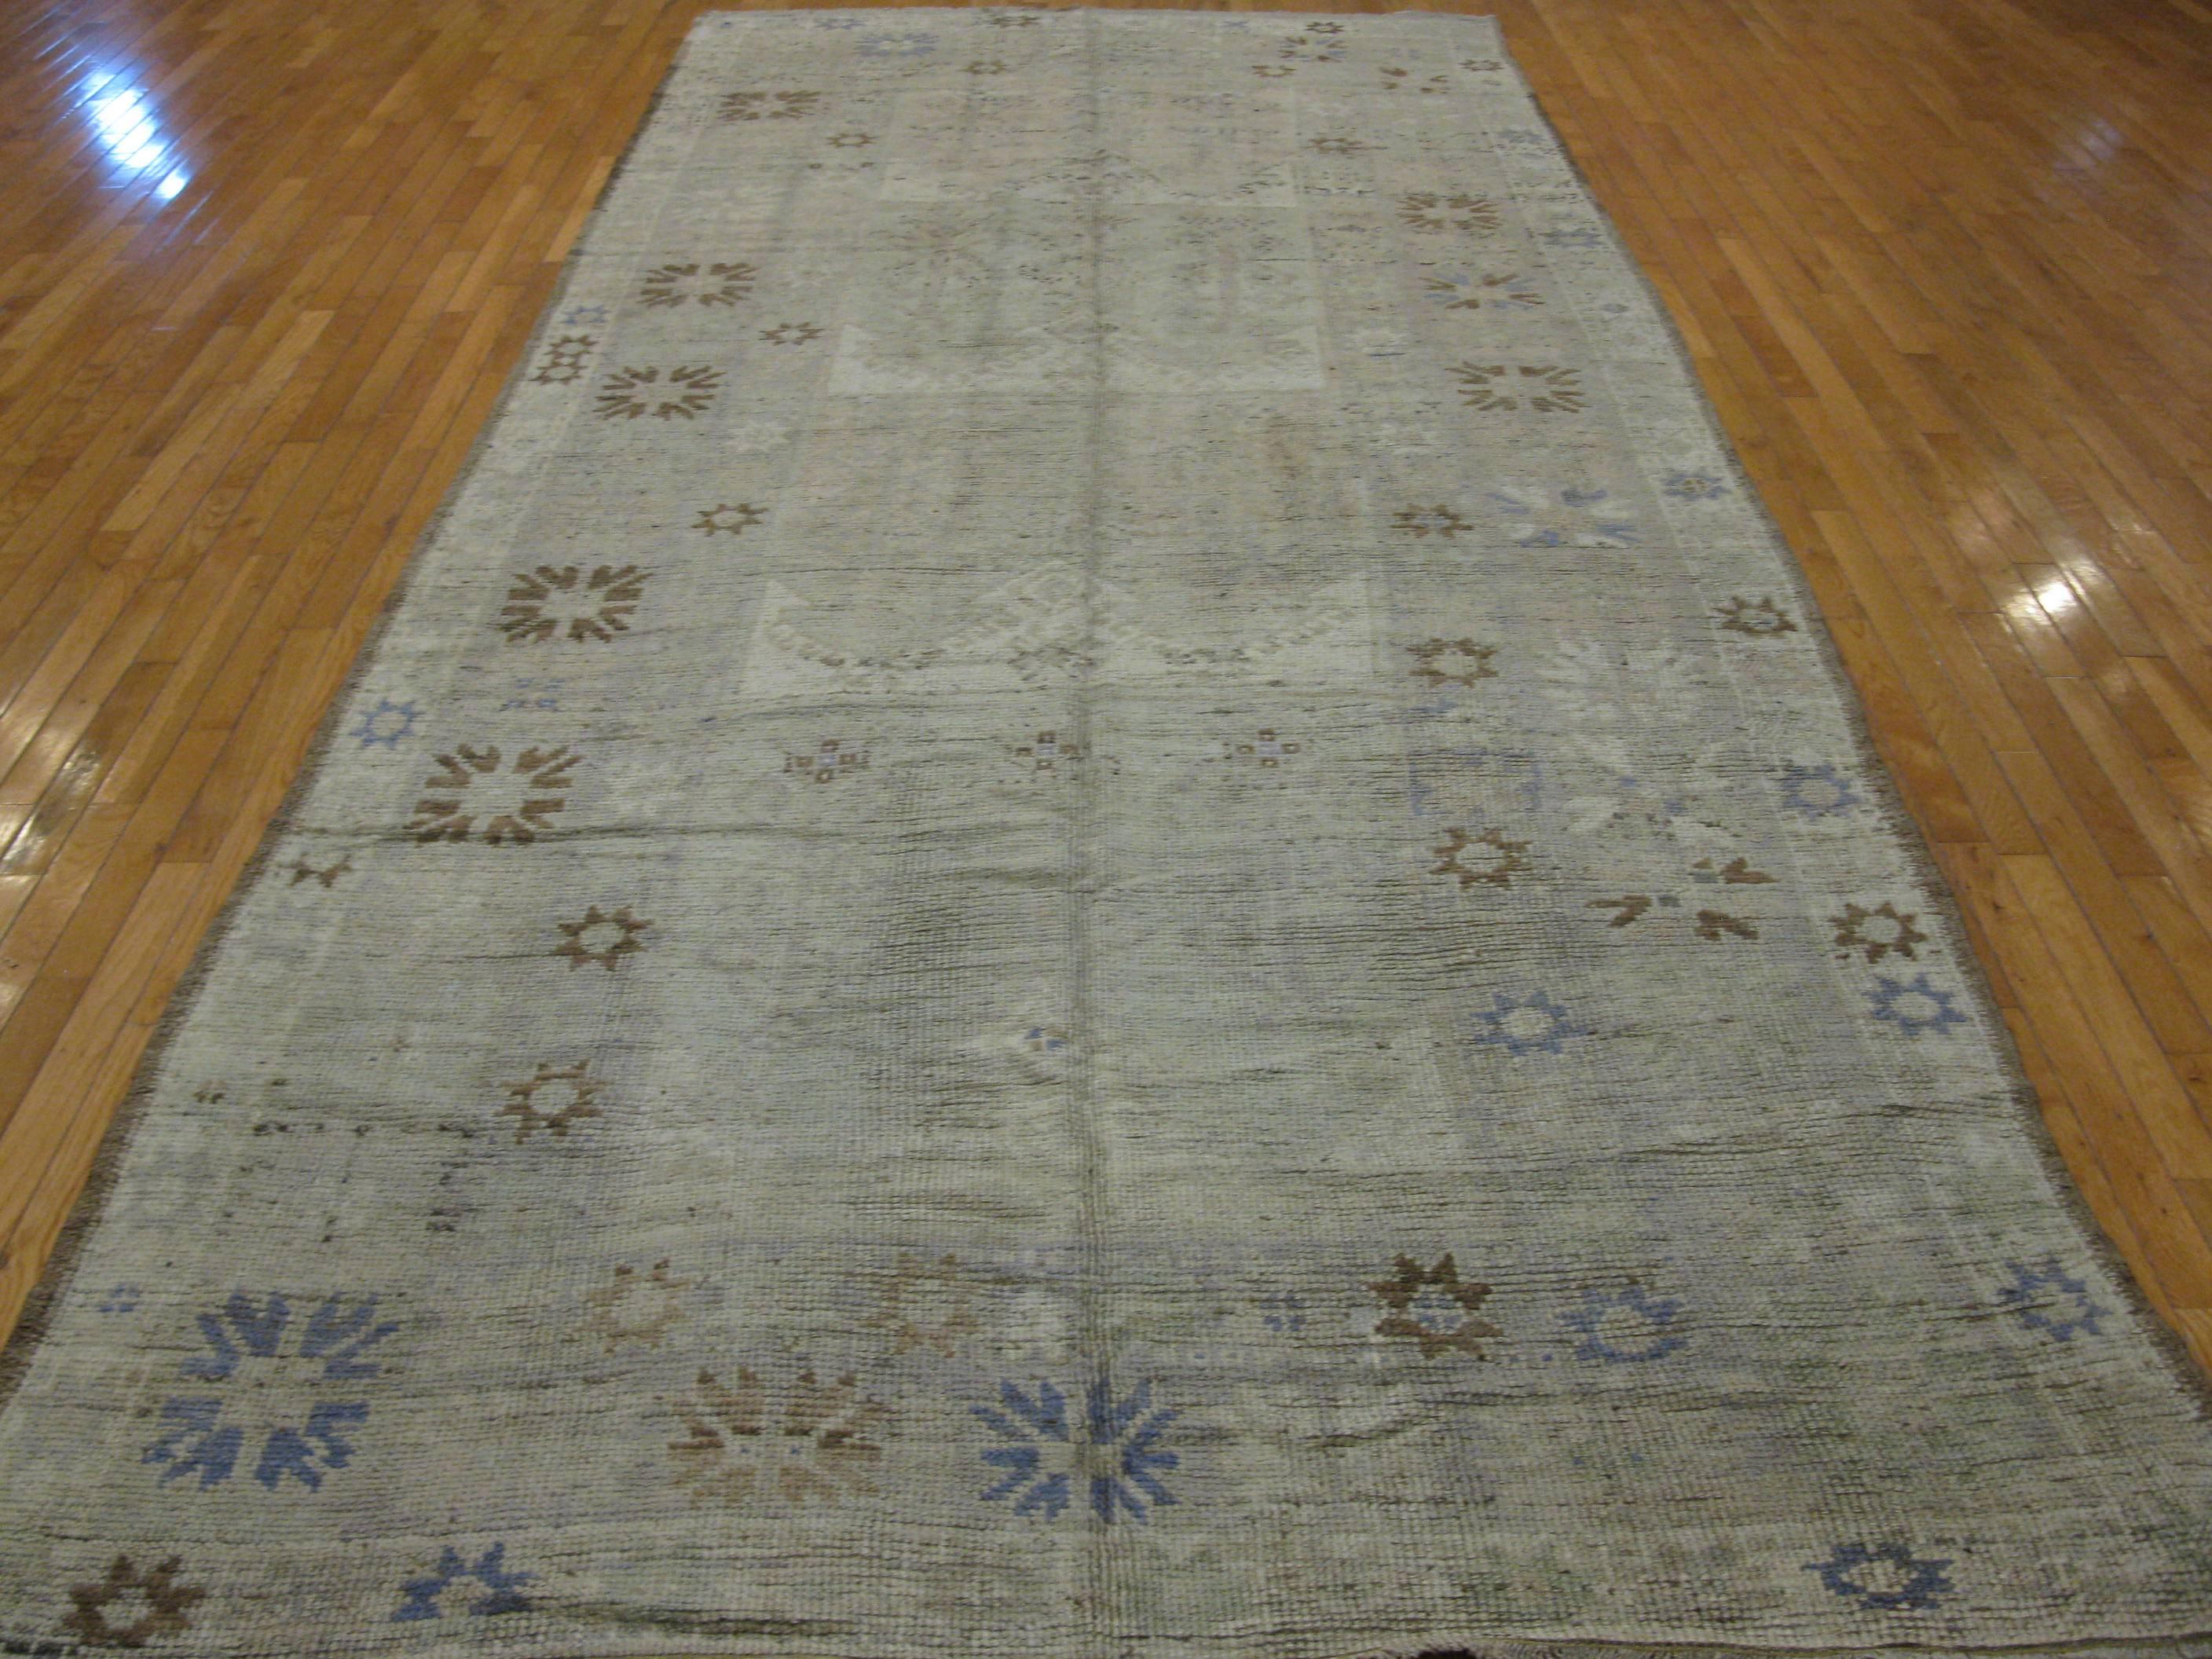 This is a beautiful antique washed hand-knotted genuine vintage Anatolian Oushak style Turkish rug in a wide and long gallery size. The rug measures 5' 9'' x 13' 10'' made of 100% wool in soft neutral tones.